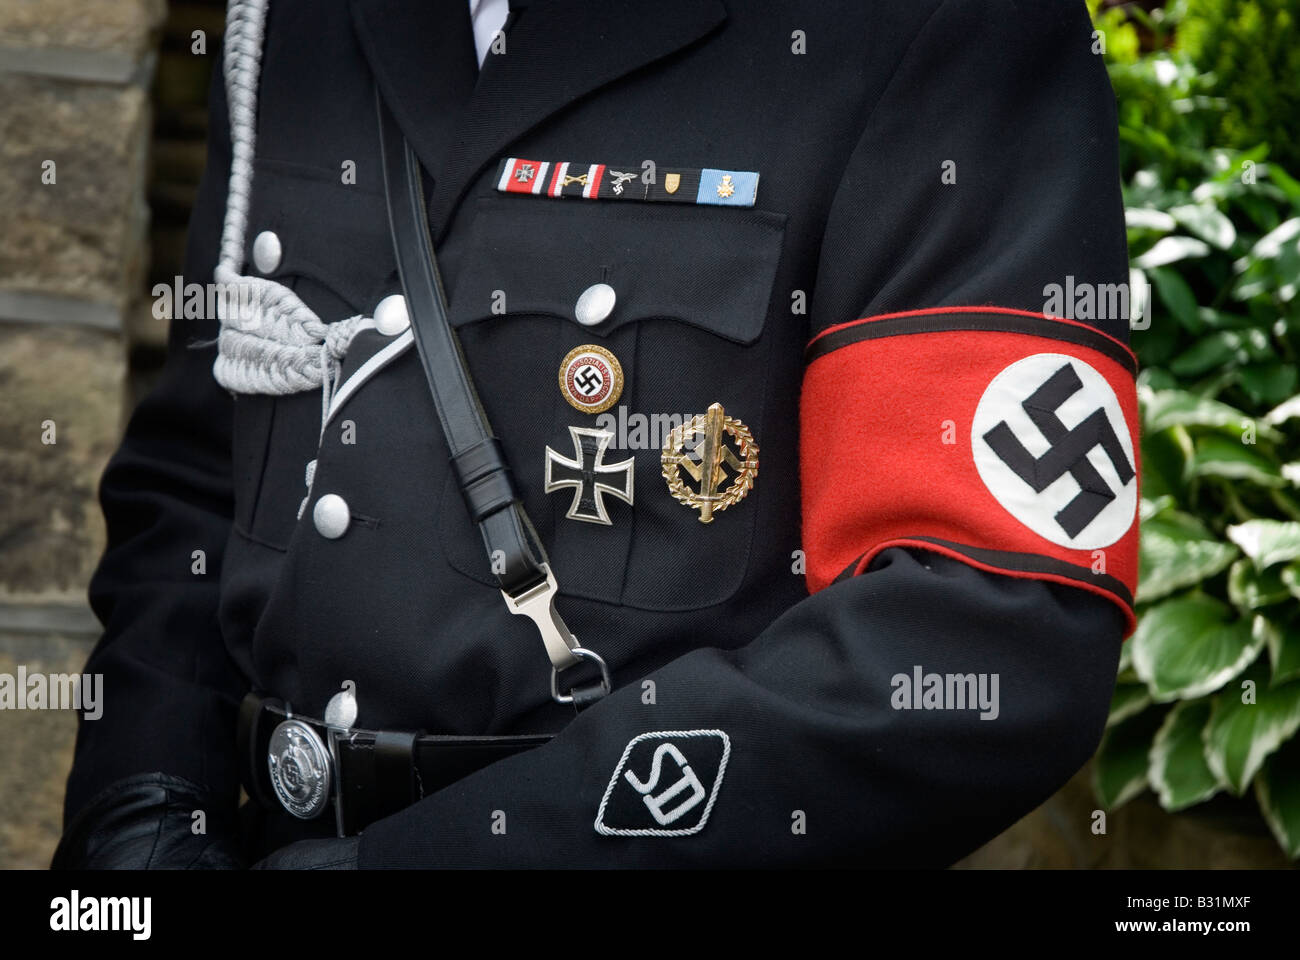 Nazi Uniform High Resolution Stock Photography and Images - Alamy